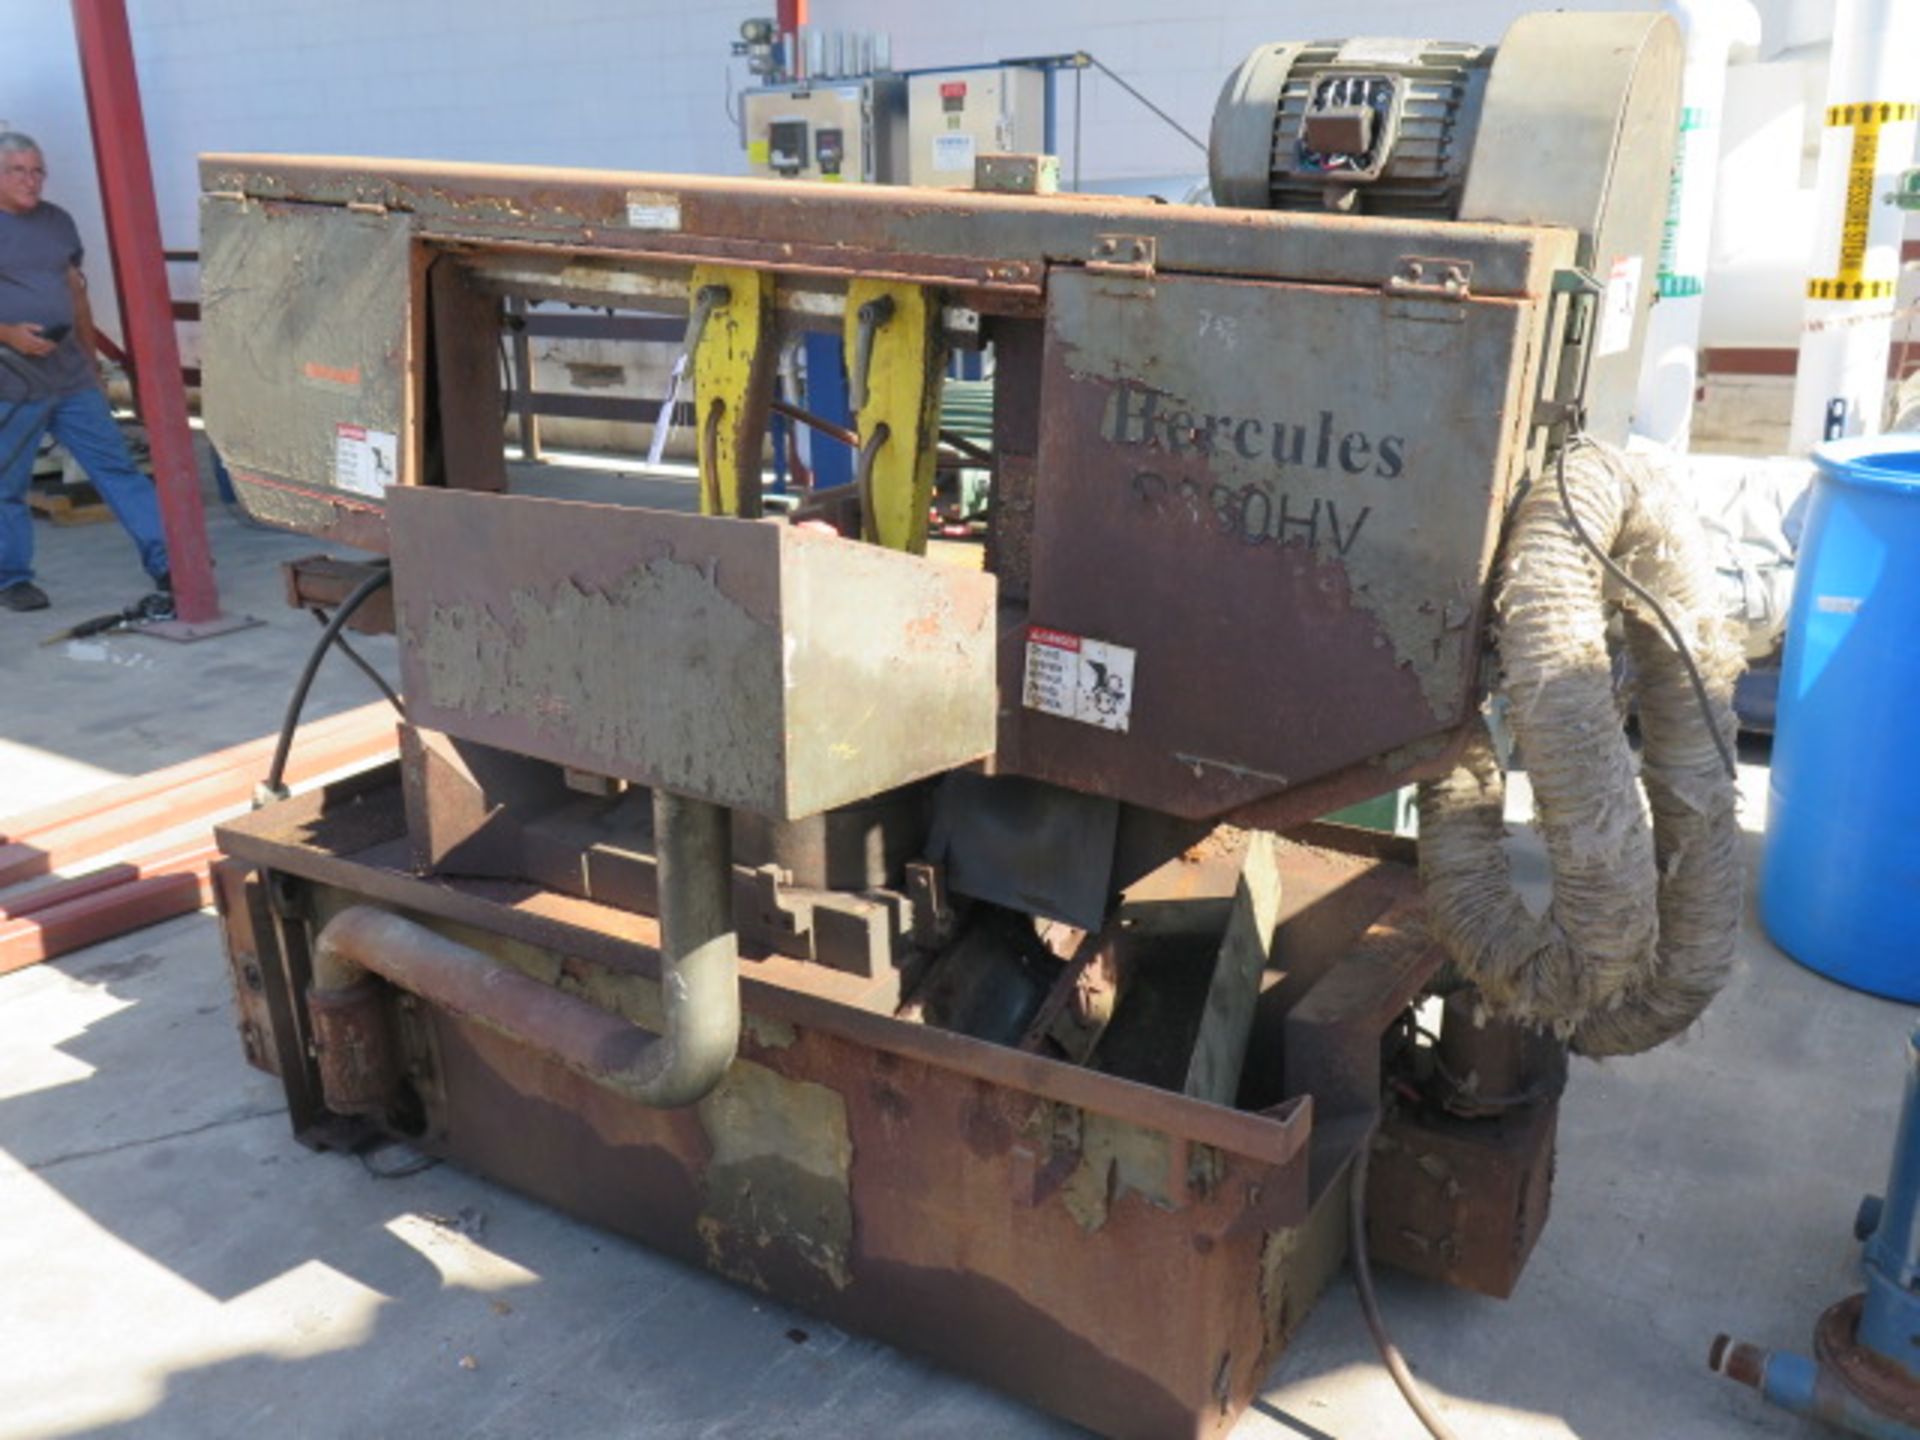 Spartan Marvel Hercules S330HV Horizontal Miter Band Saw s/n S330HV-122 w/Marvel Controls,SOLD AS IS - Image 2 of 12